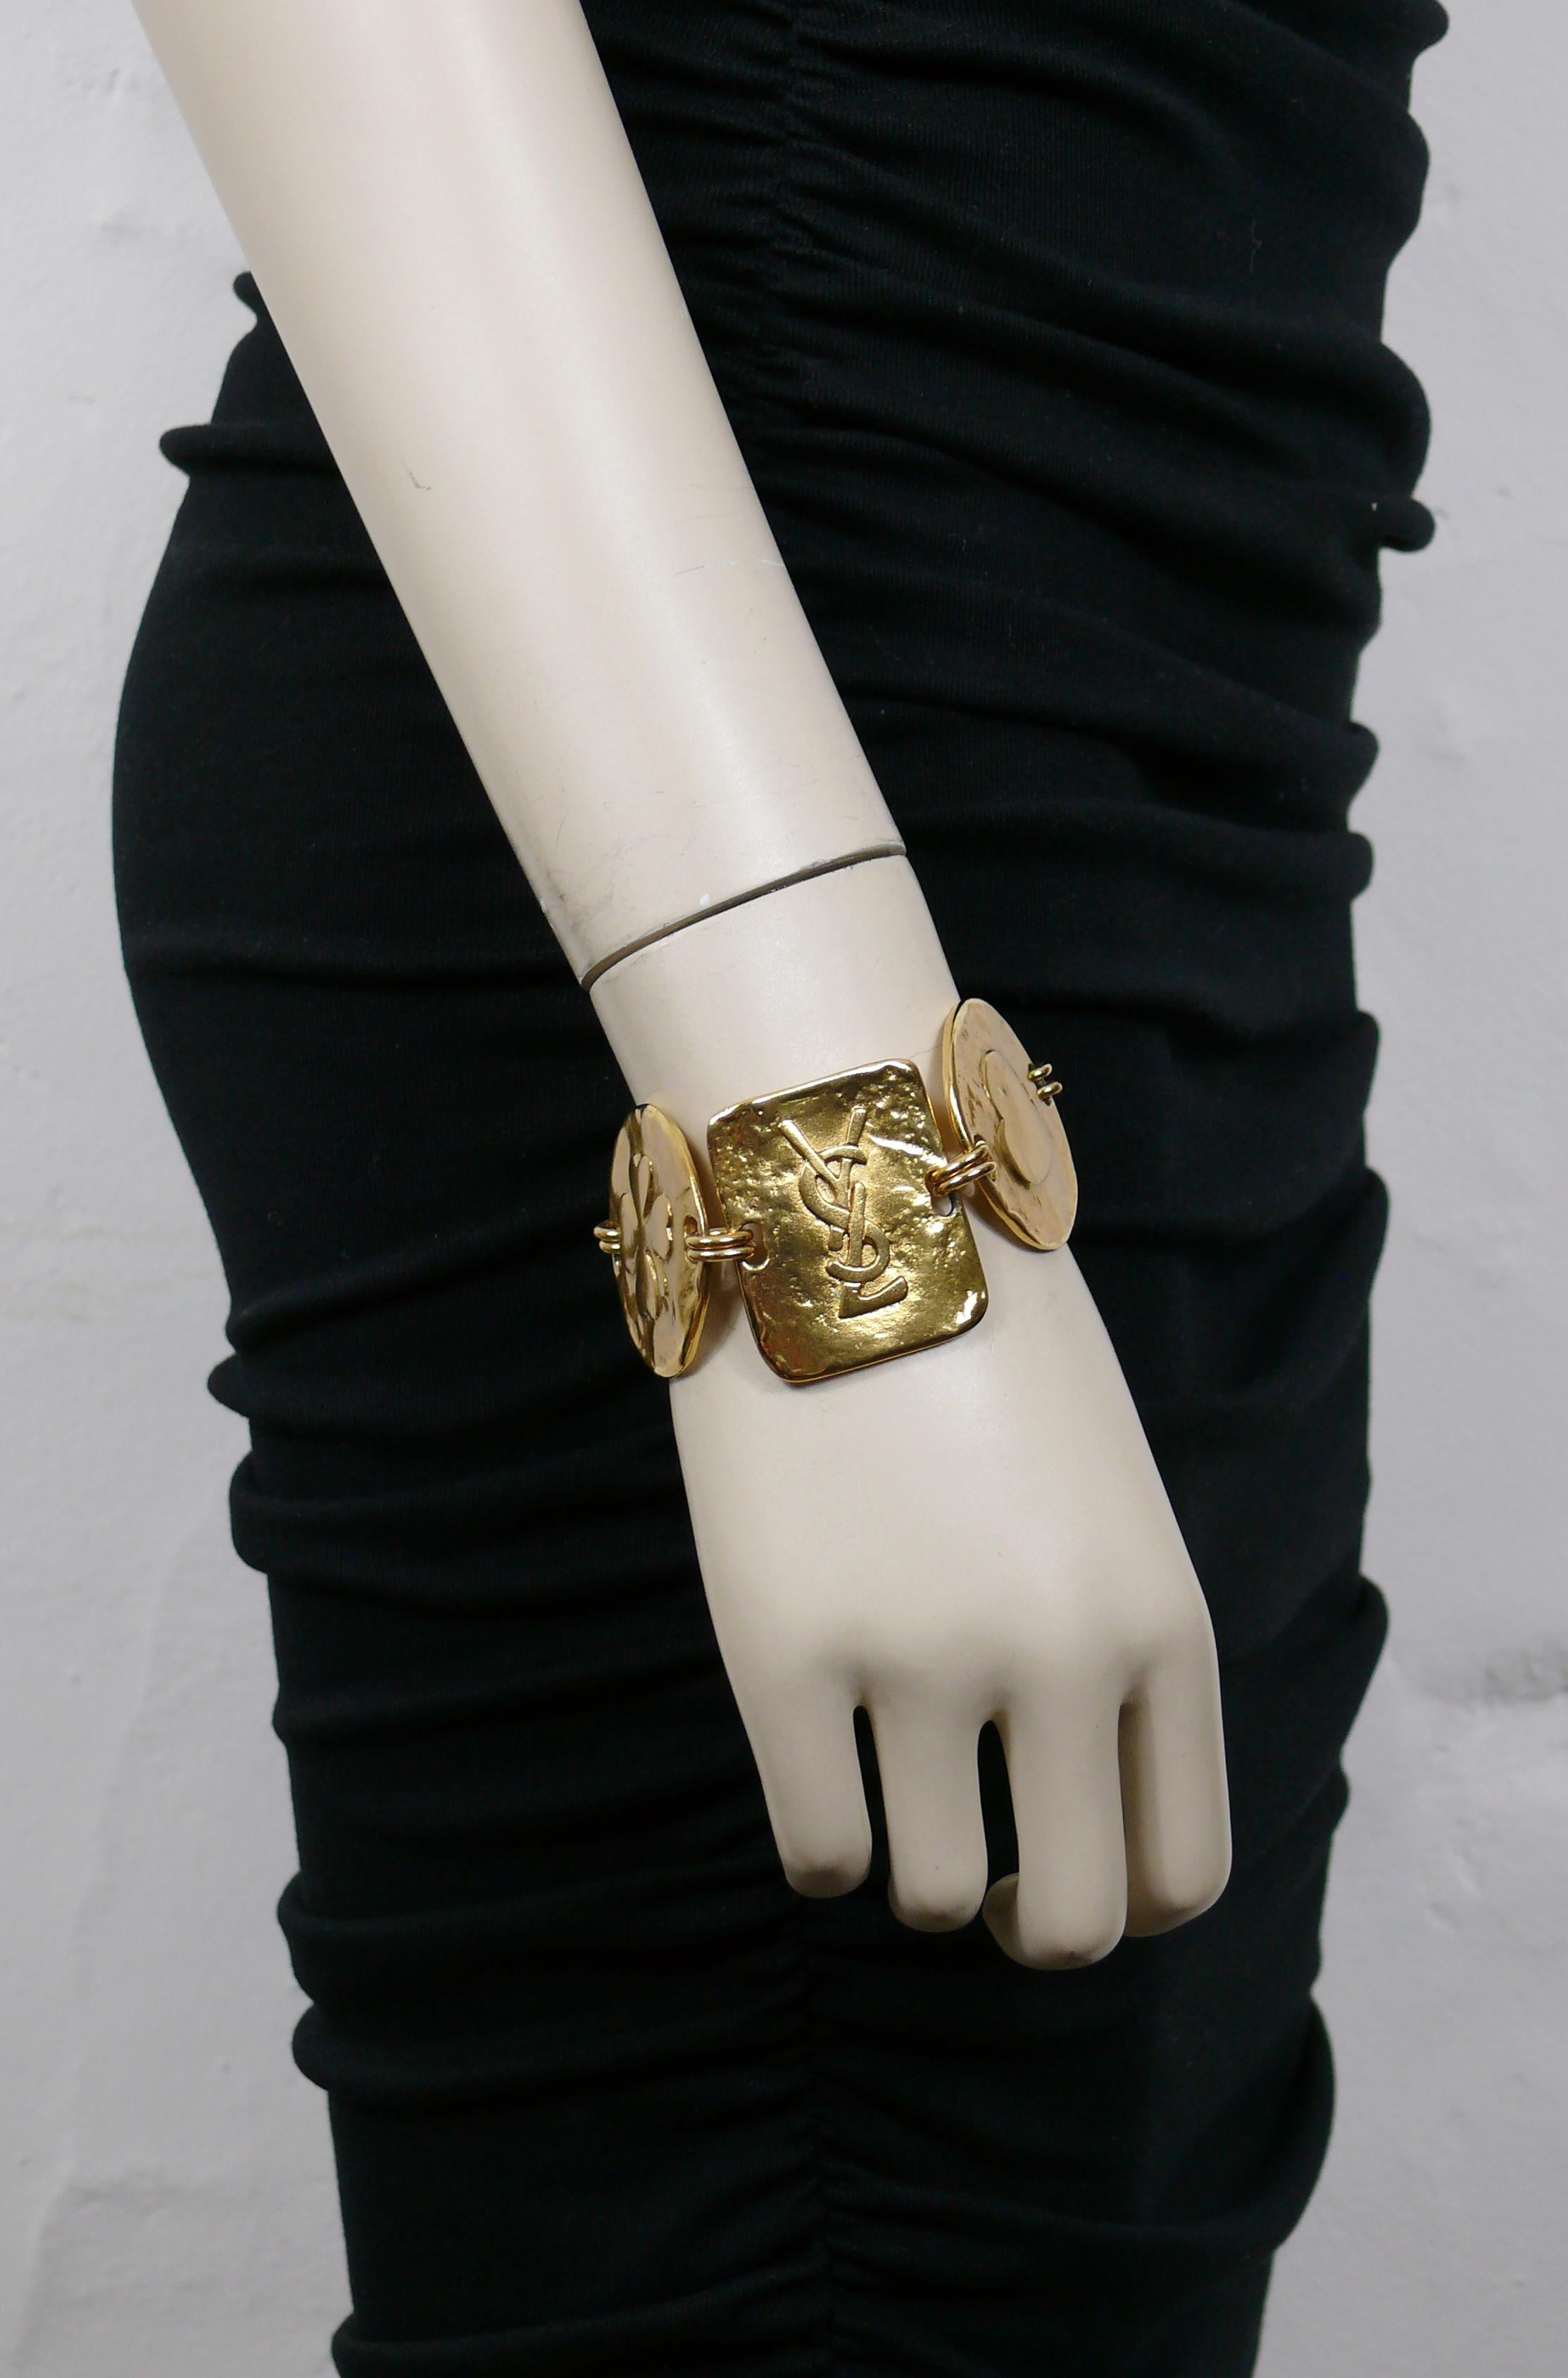 YVES SAINT LAURENT vintage gold tone link bracelet featuring iconic symbols : YSL logo, crescent moon, star, heart, lucky clover.

Push clasp closure.

Embossed with the YSL logo on the central link.
Embossed Made in France on the reverse